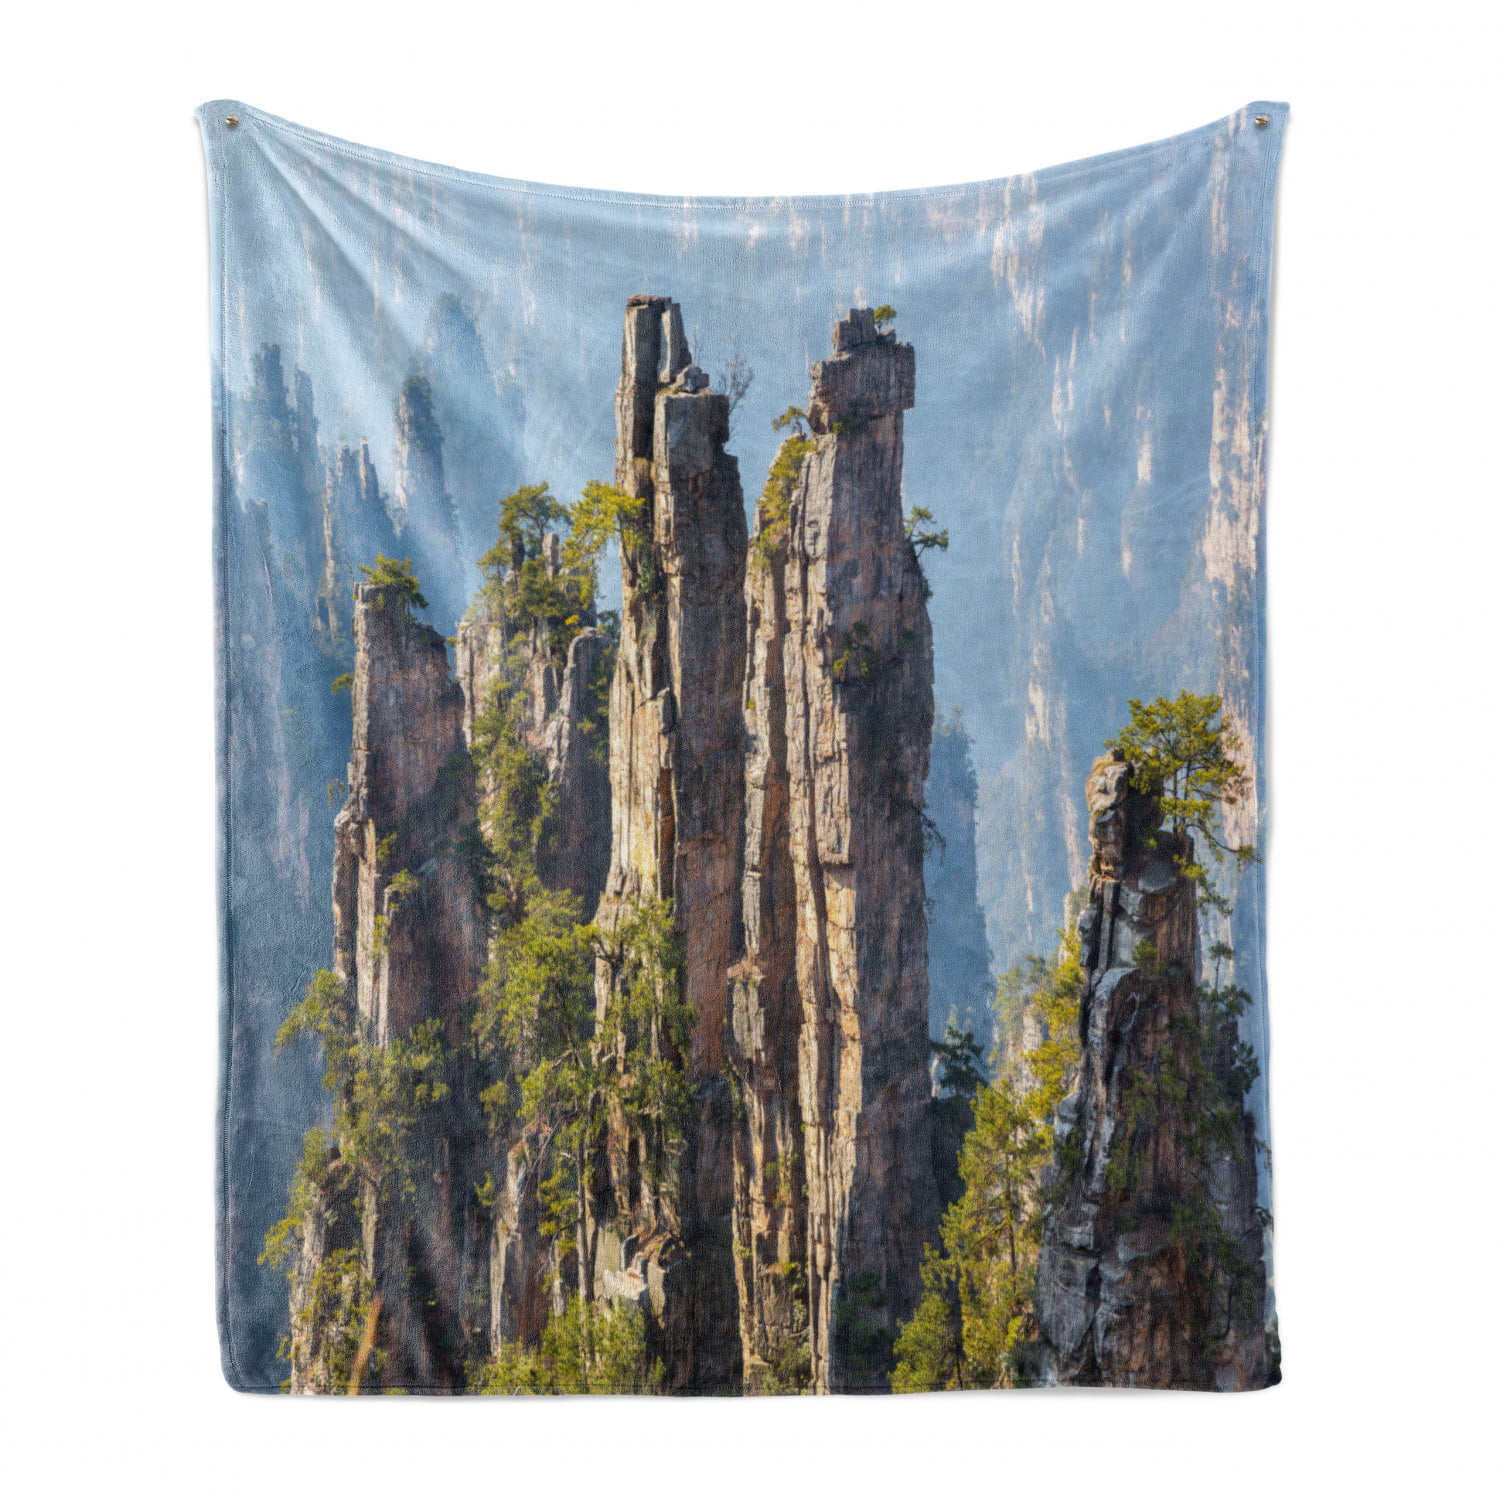 Cozy Plush for Indoor and Outdoor Use 60 x 80 Ambesonne Nature Soft Flannel Fleece Throw Blanket Wonders of The World National Park Rock Formation Czech Image Olive Green Sky Blue 